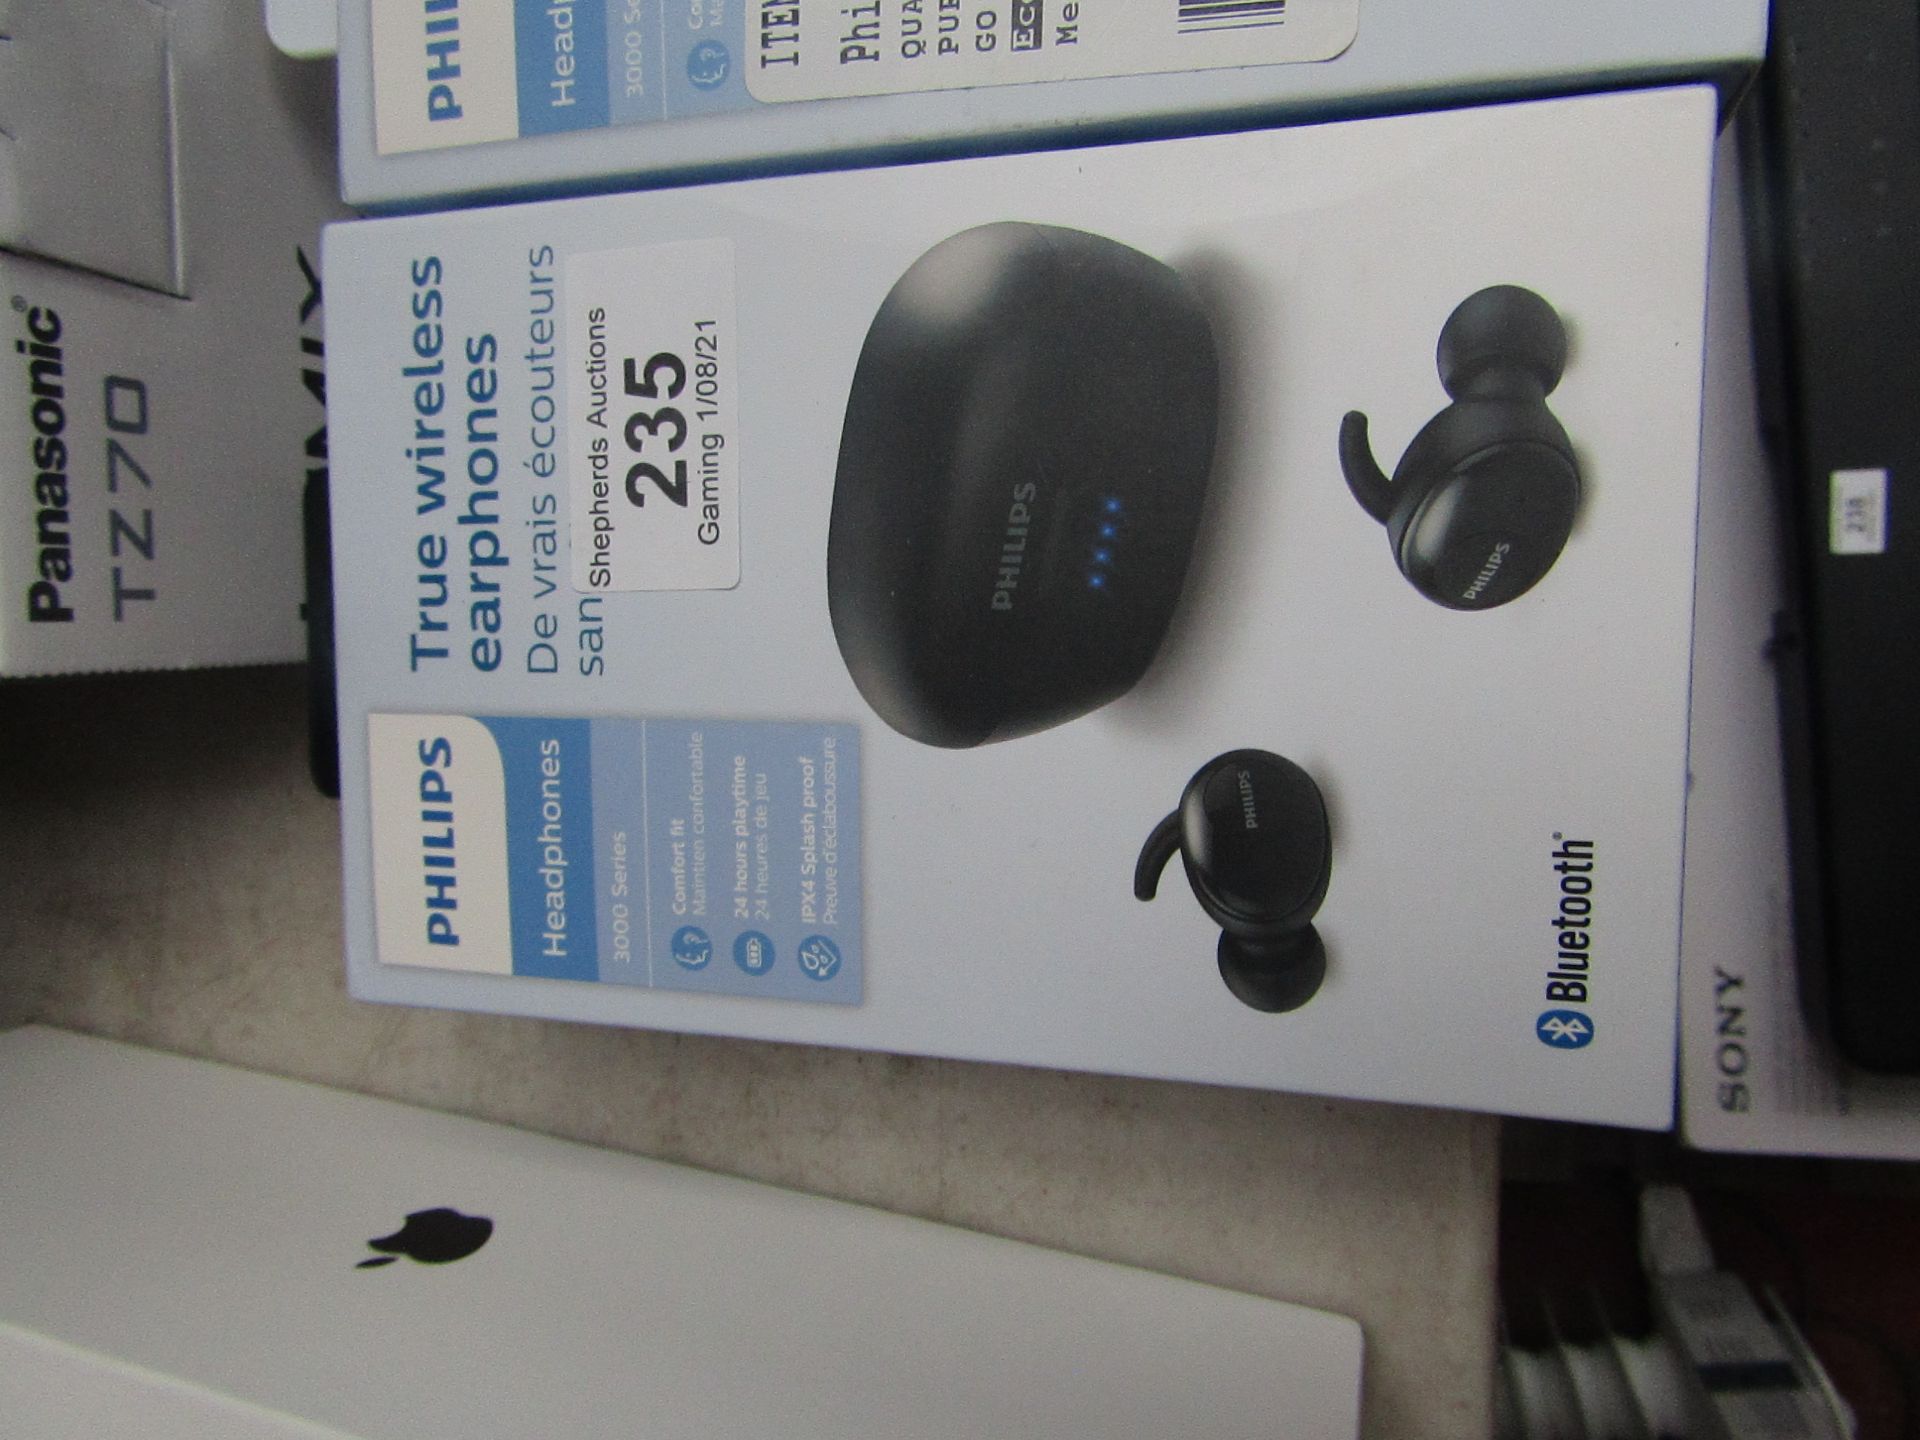 Phillips 3000 Series ear pods, boxed and unchecked